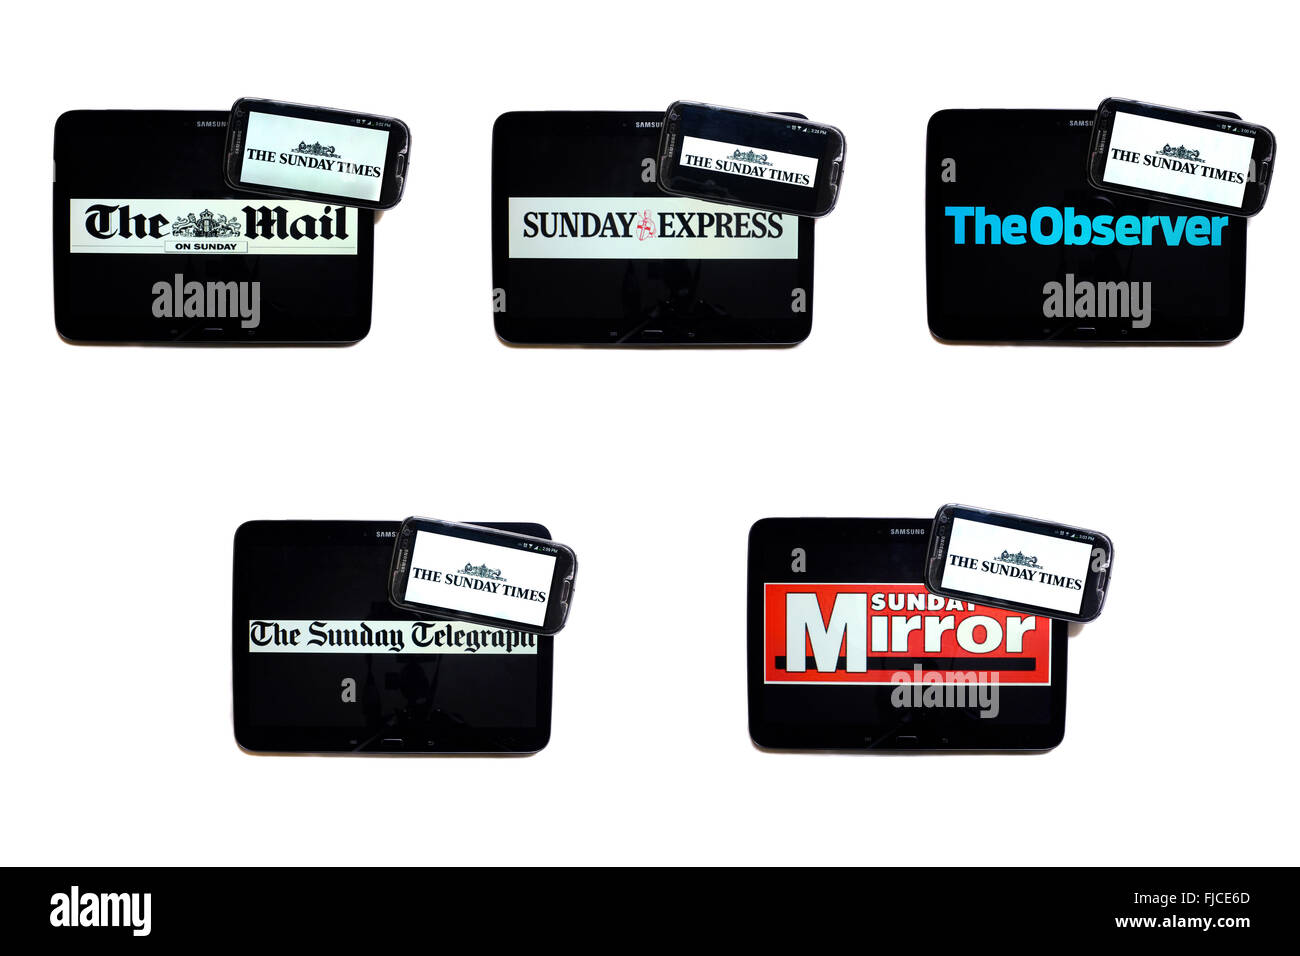 The Sunday Times newspaper logo on smartphones screens surrounded by tablets displaying the logos of rival newspapers. Stock Photo